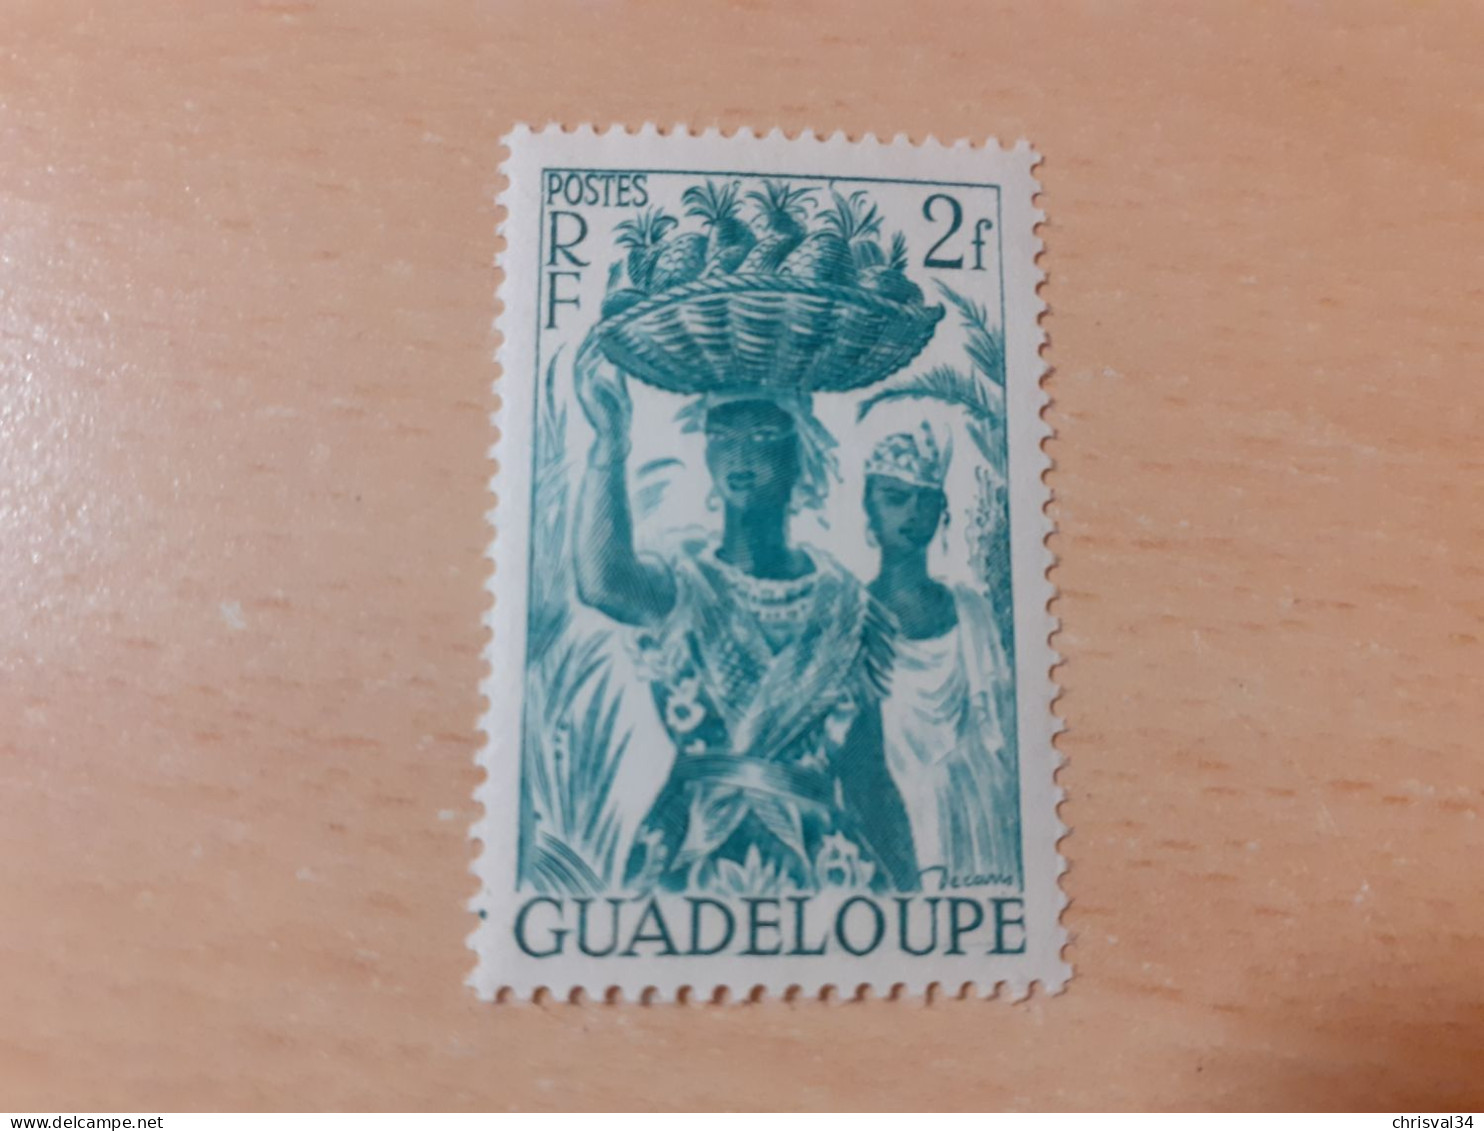 TIMBRE   GUADELOUPE       N  203    COTE  1,50   EUROS  NEUF  TRACE  CHARNIERE - Unused Stamps